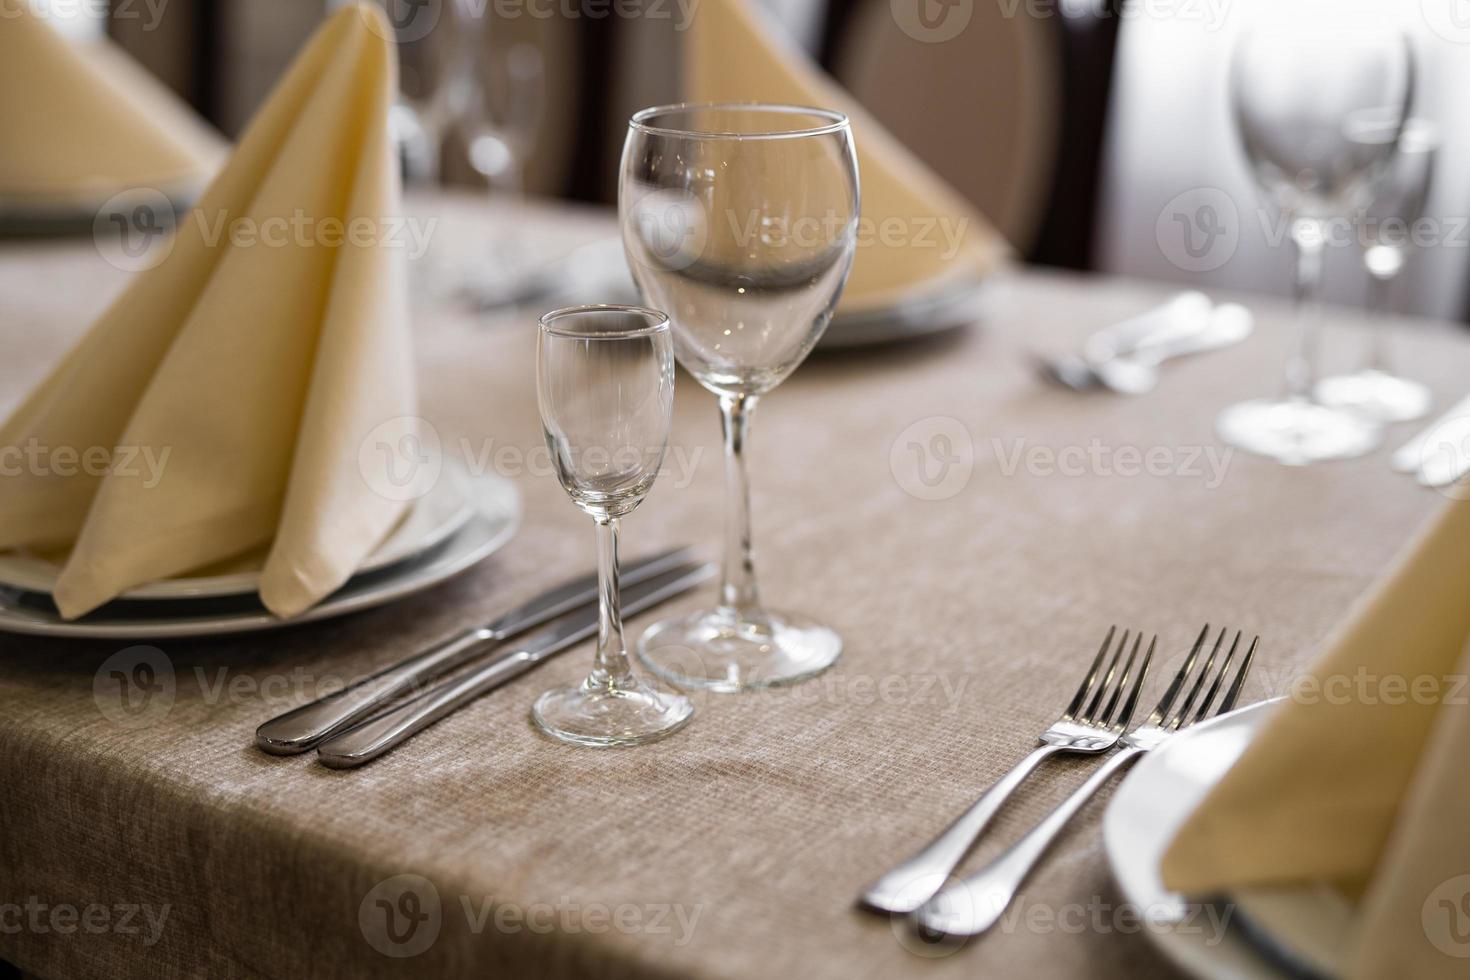 empty goblets and other cutlery are served on the festive table. photo